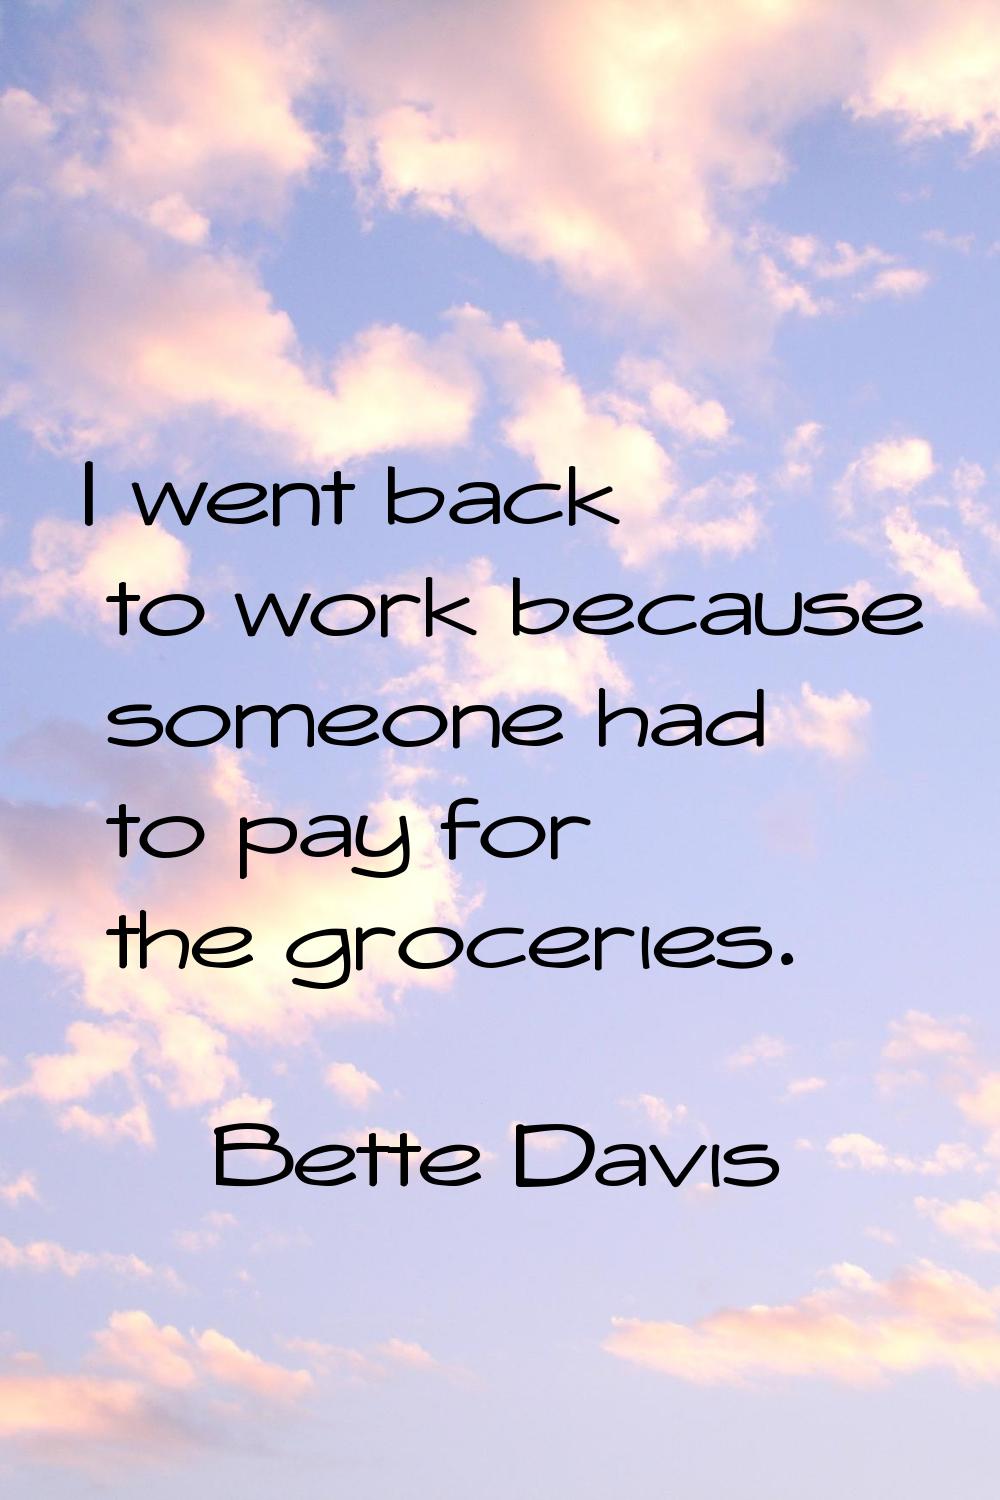 I went back to work because someone had to pay for the groceries.